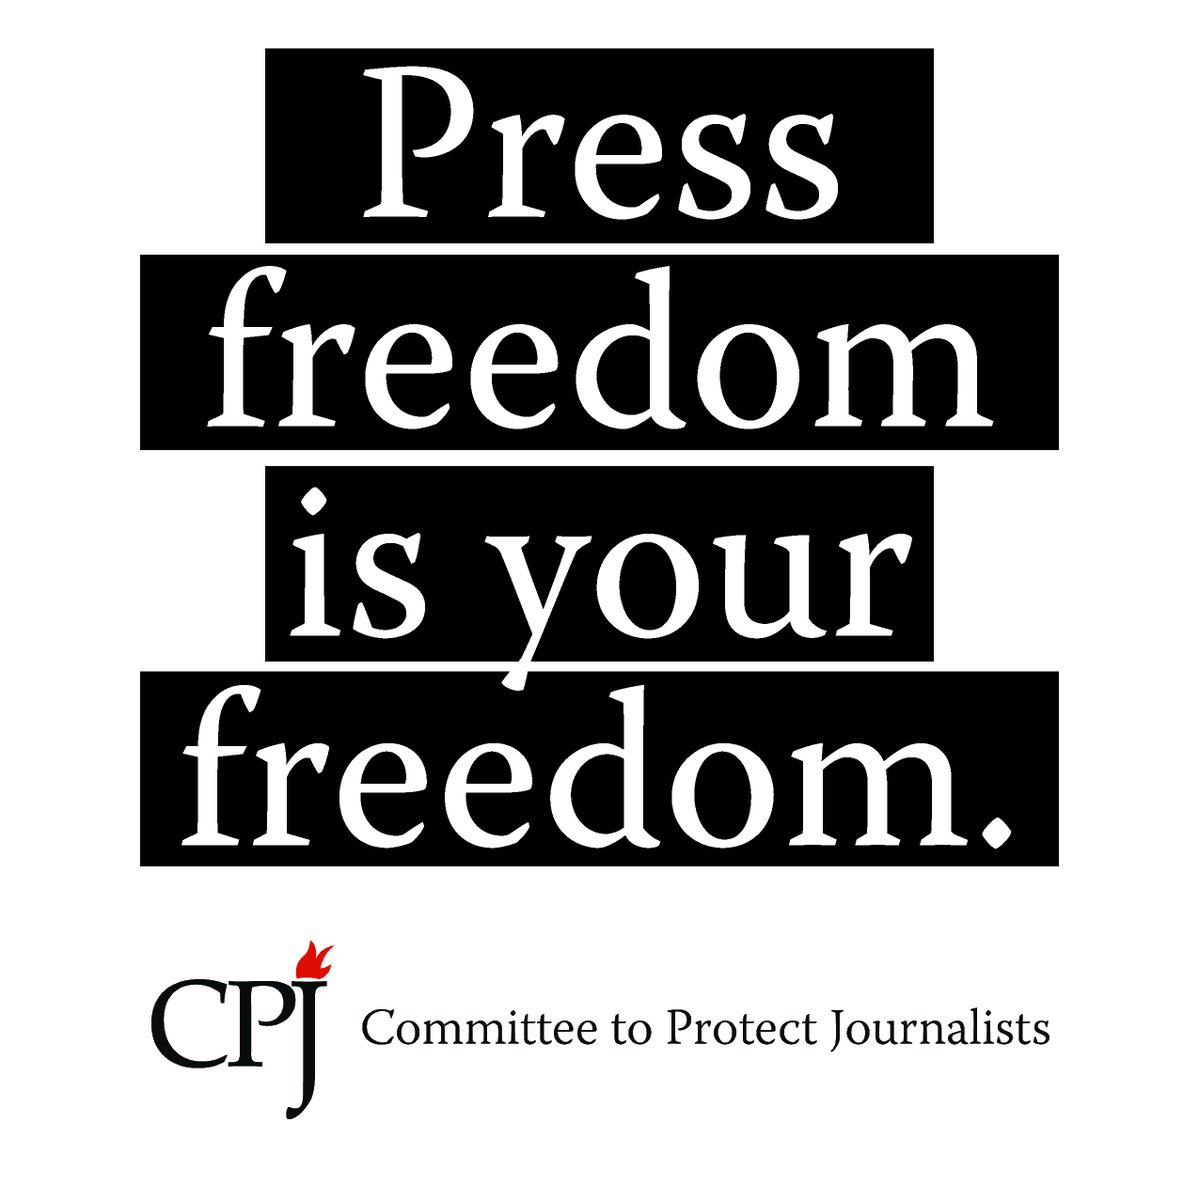 TODAY, as we mark #WorldPressFreedomDay, journalists continue to face attack, jailing, and other censorship efforts across Sub Saharan Africa. But this could change. This thread outlines actions that authorities in 10 countries can take to improve local press freedom. Join CPJ…